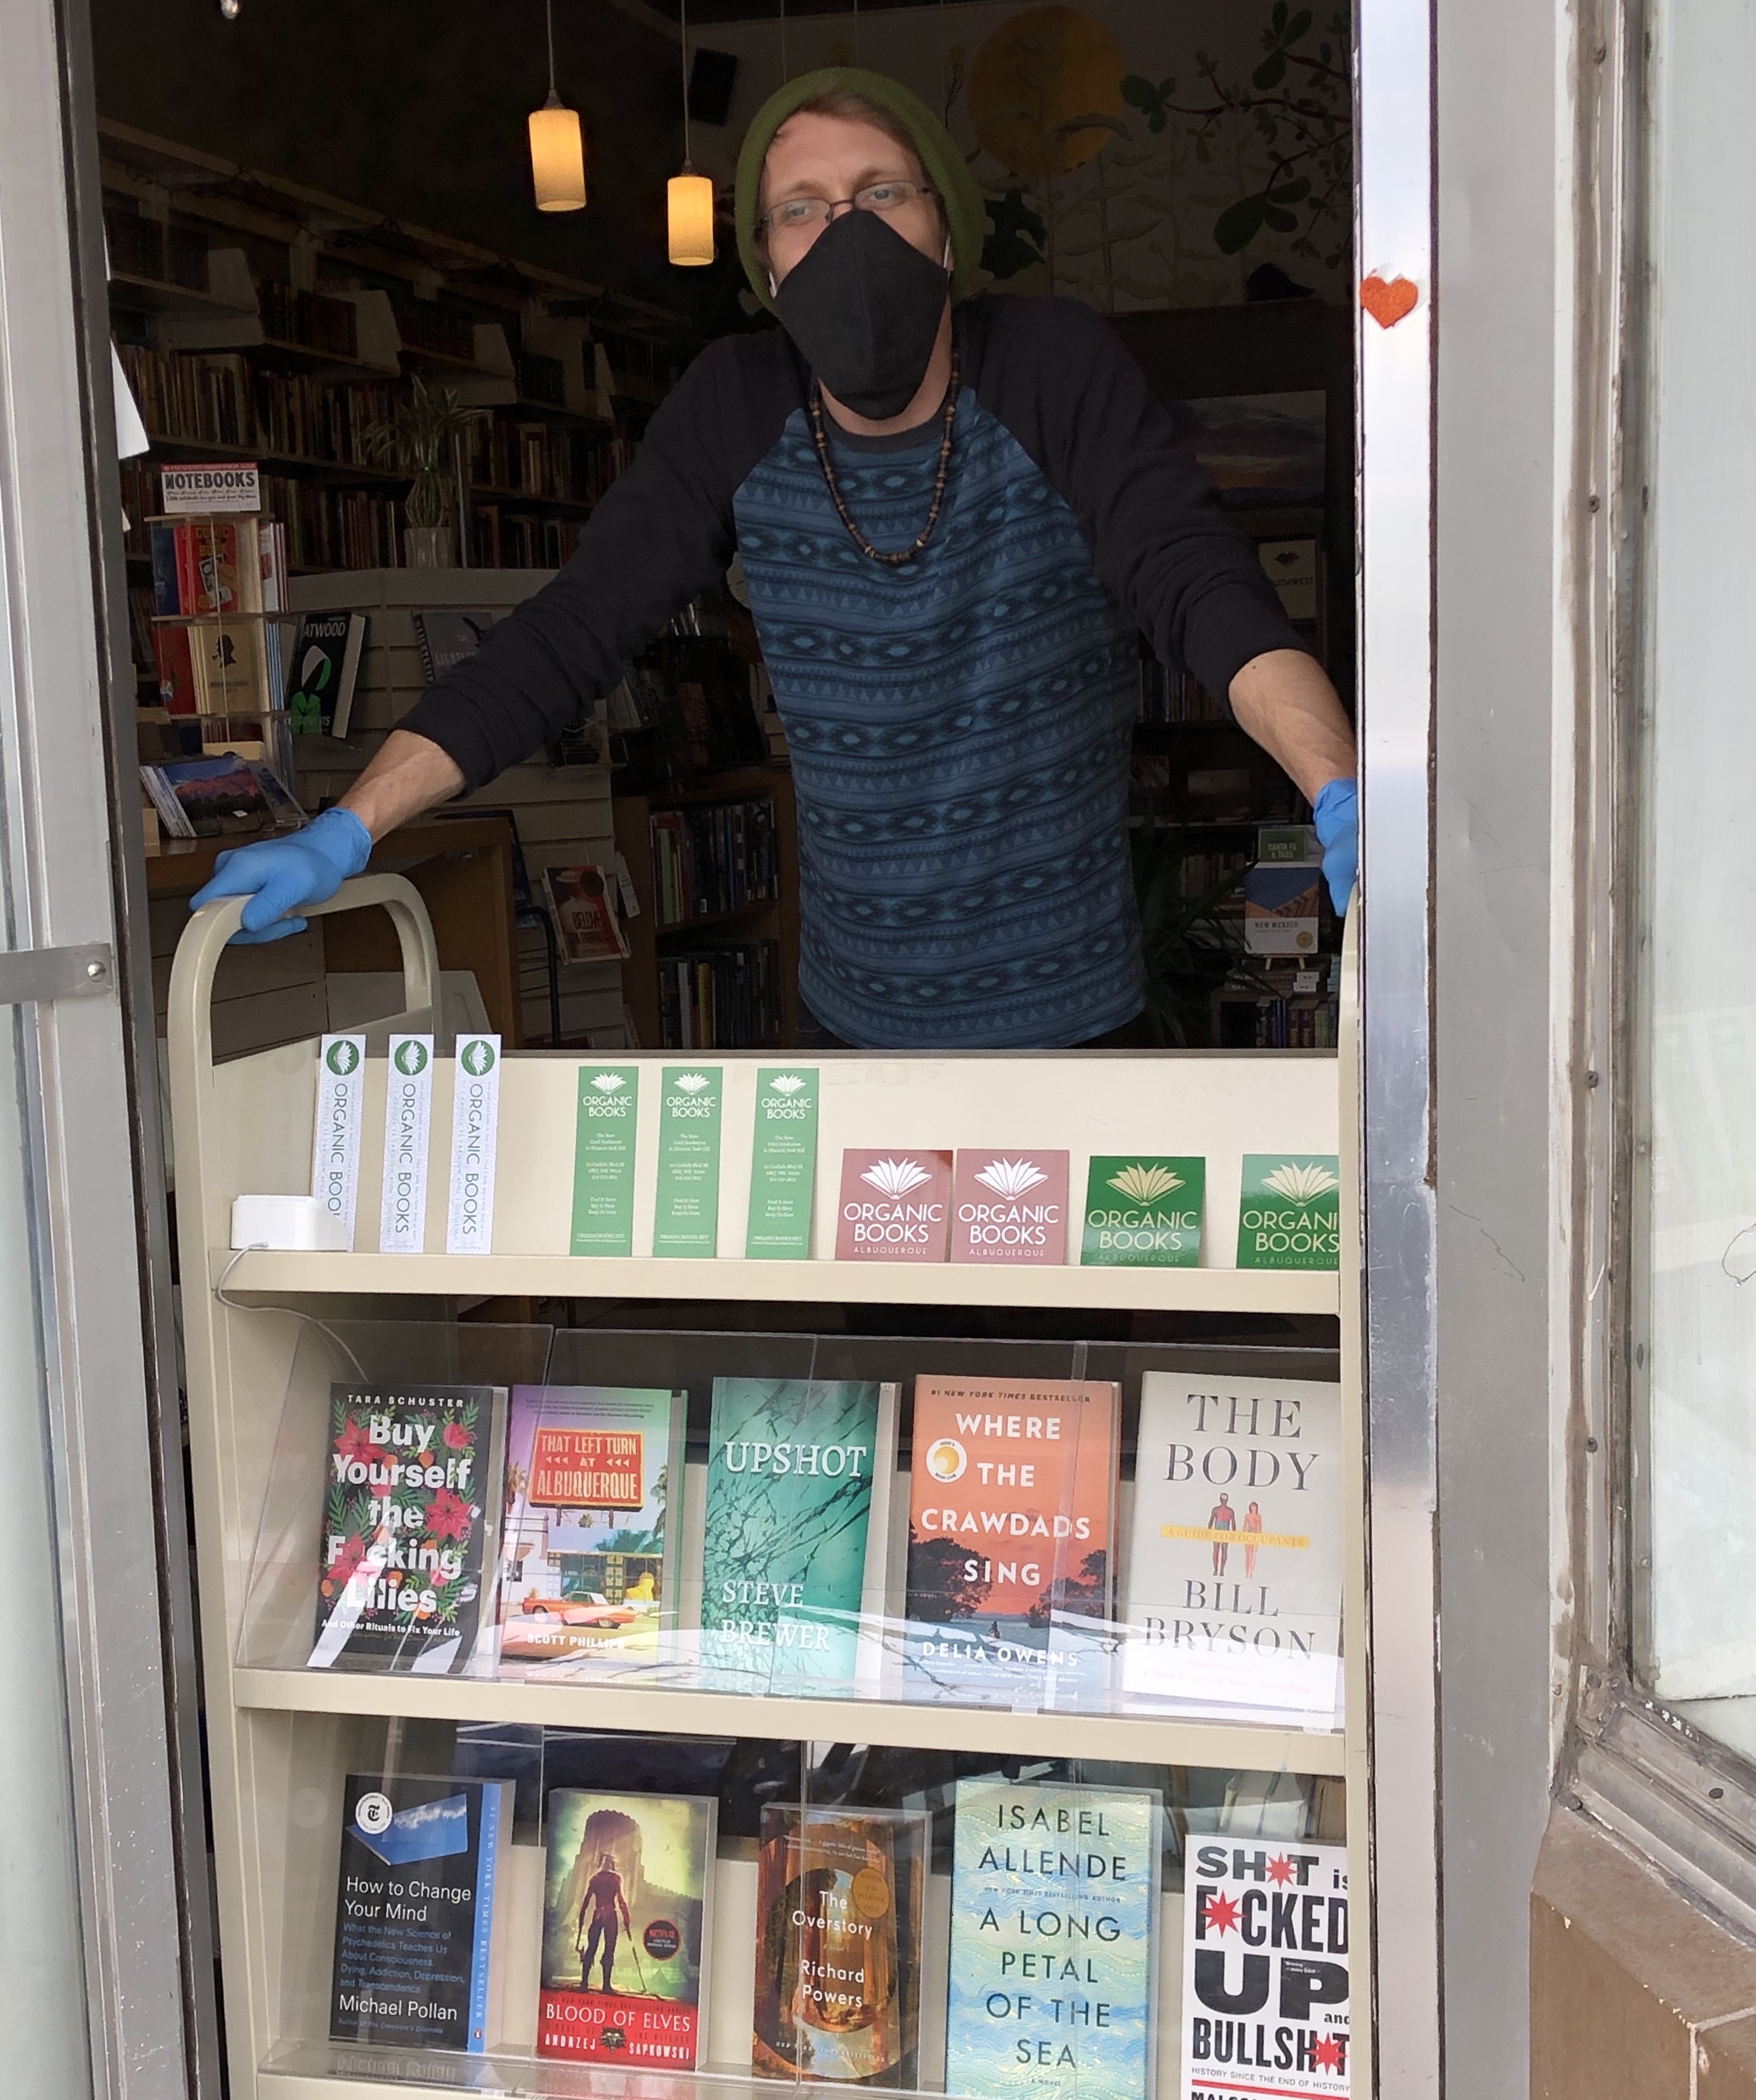 Seth Brewer, a co-owner of Organic Books in Albuquerque, New Mexico, at his bookstore before a stay-at-home order closed it down. (Kelly Brewer)